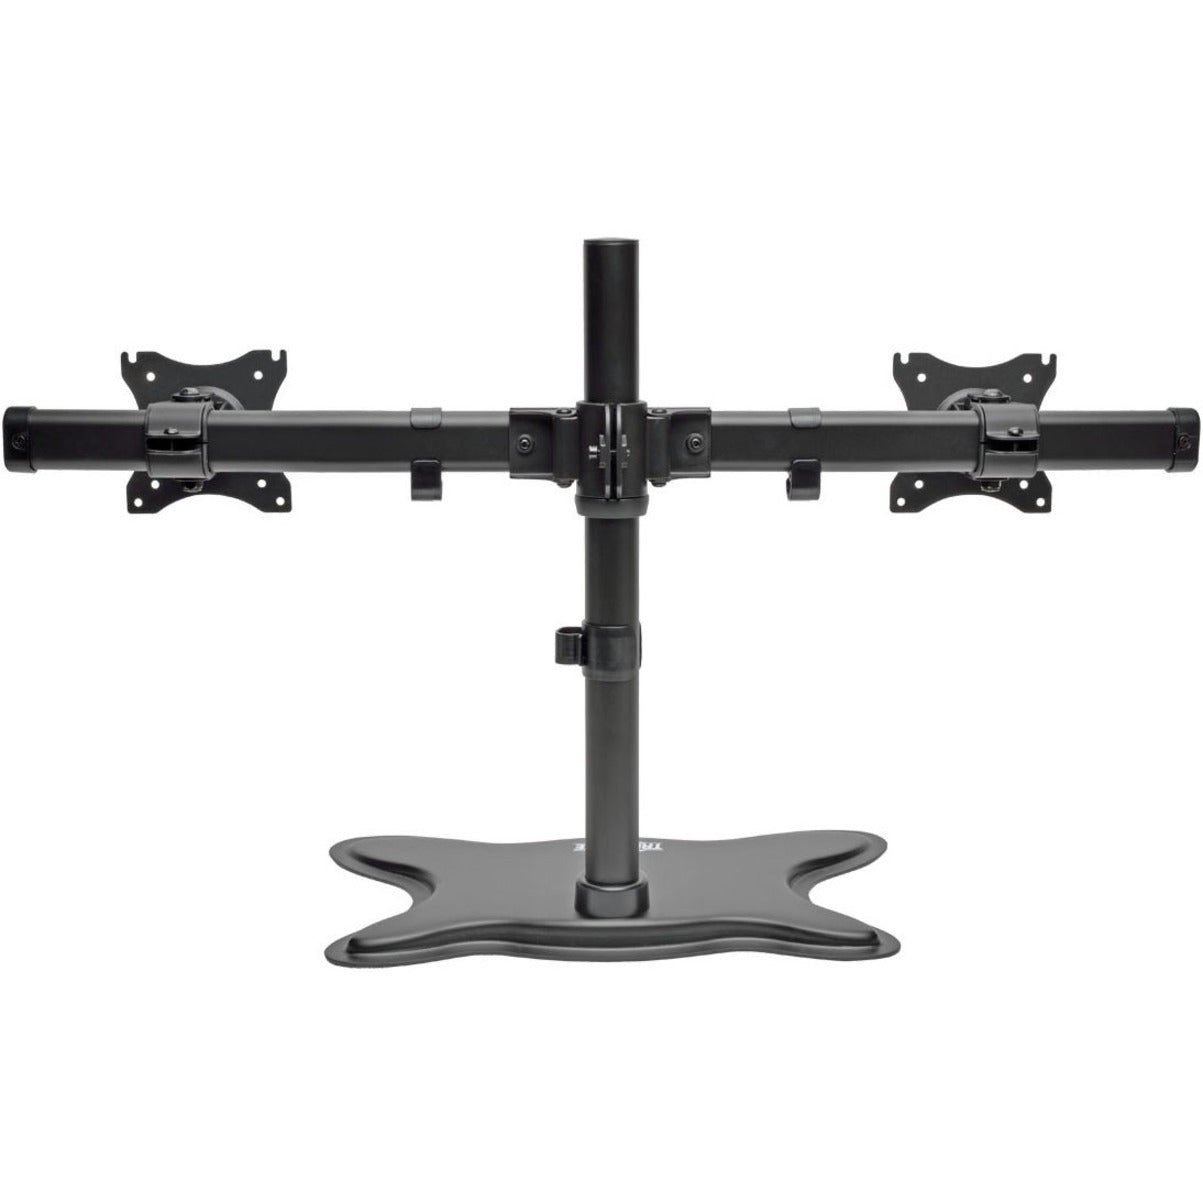 Tripp Lite DDR1327SDD Dual-Monitor Desktop Mount Stand for 13" to 27" Flat-Screen Displays, Comfortable, Adjustable Arm, Cable Management, Black